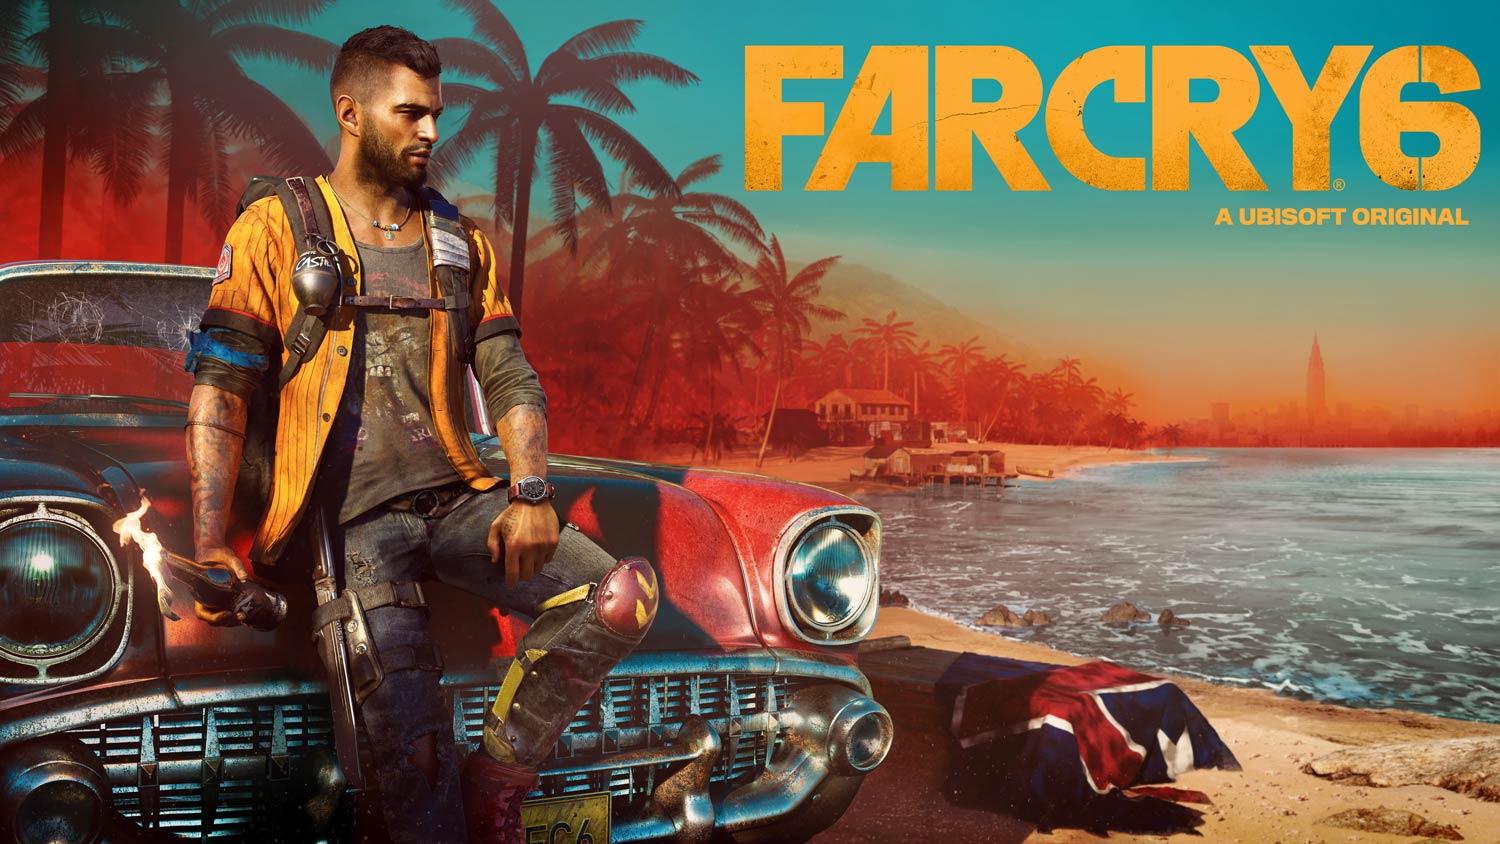 Developed and published by Ubisoft, Far Cry® 6 is a first person-shooter video game set in Yara, ruled by the cruel dictator Antón Castillo brought to life by actor Giancarlo Esposito